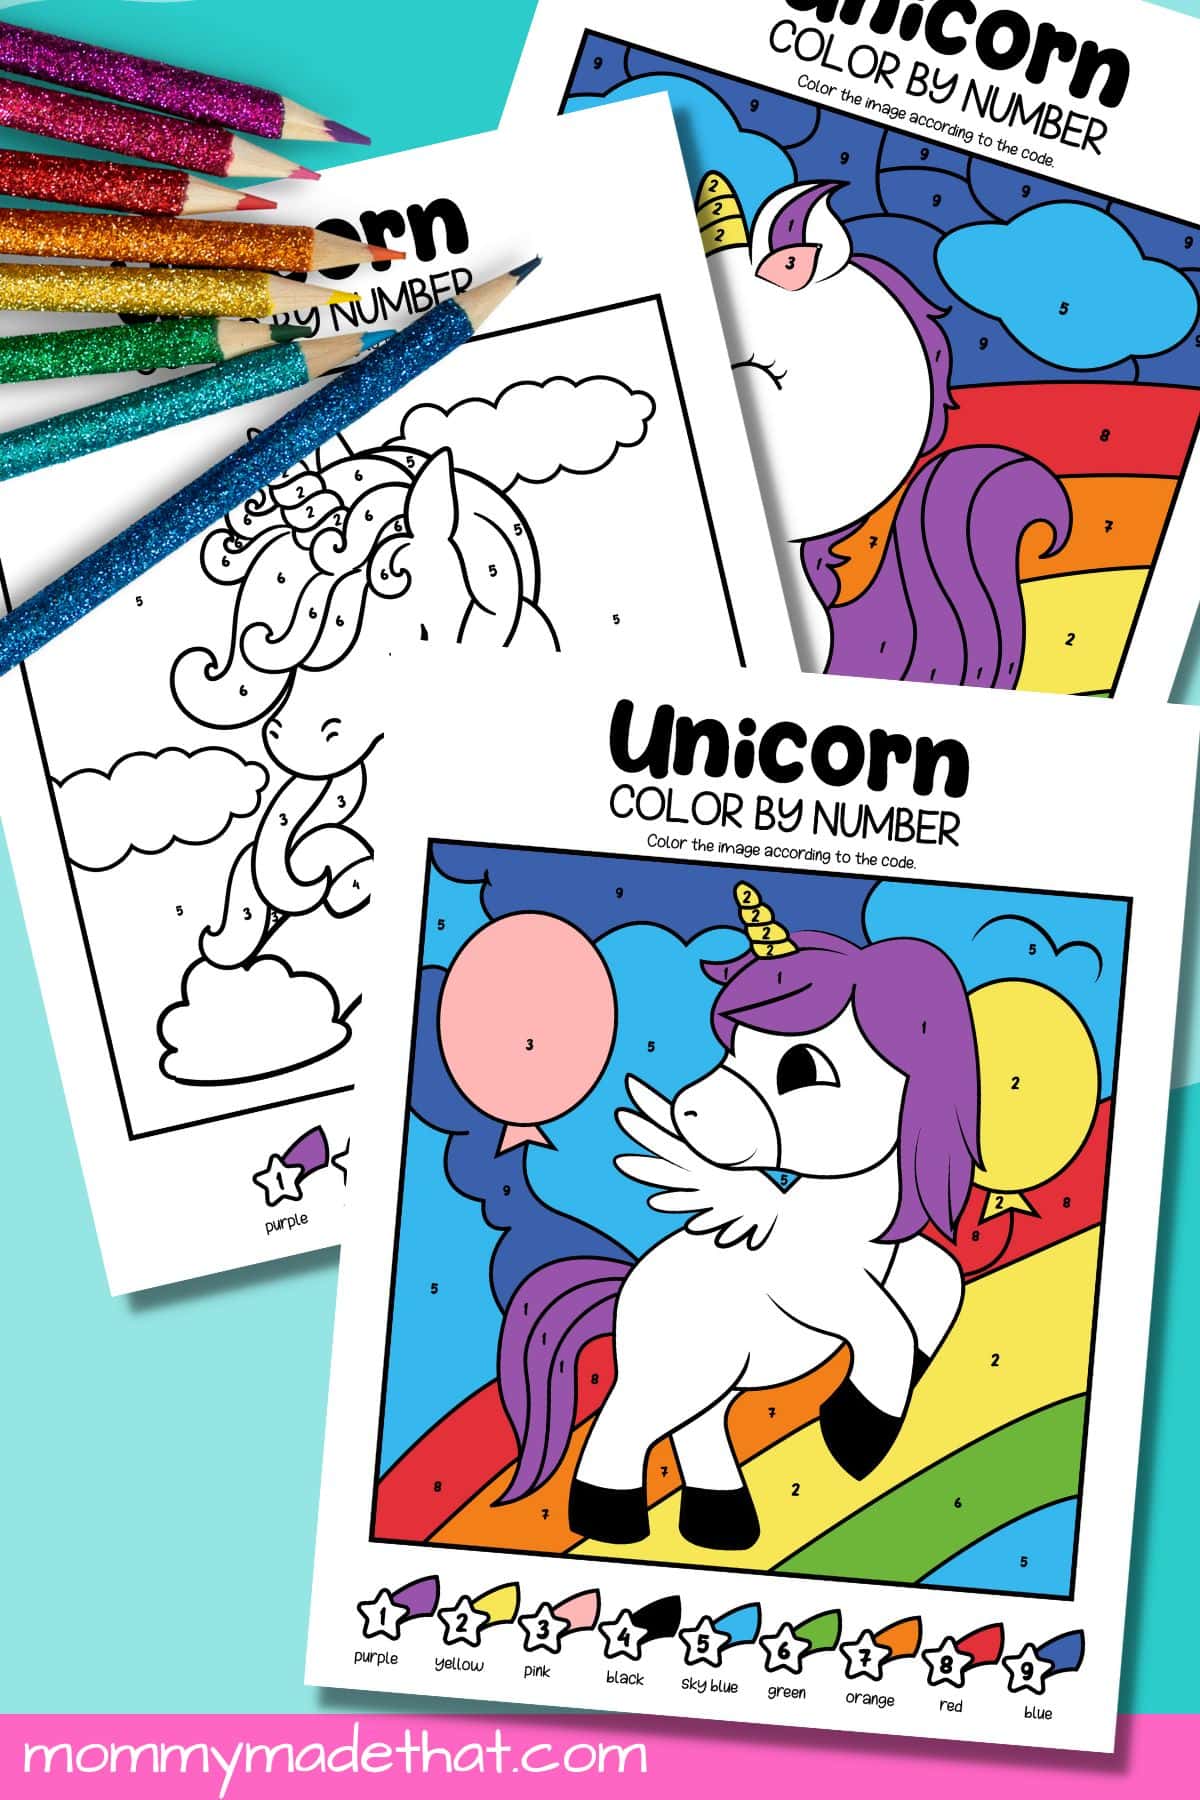 Unicorn color by numbers lots of cute free printables